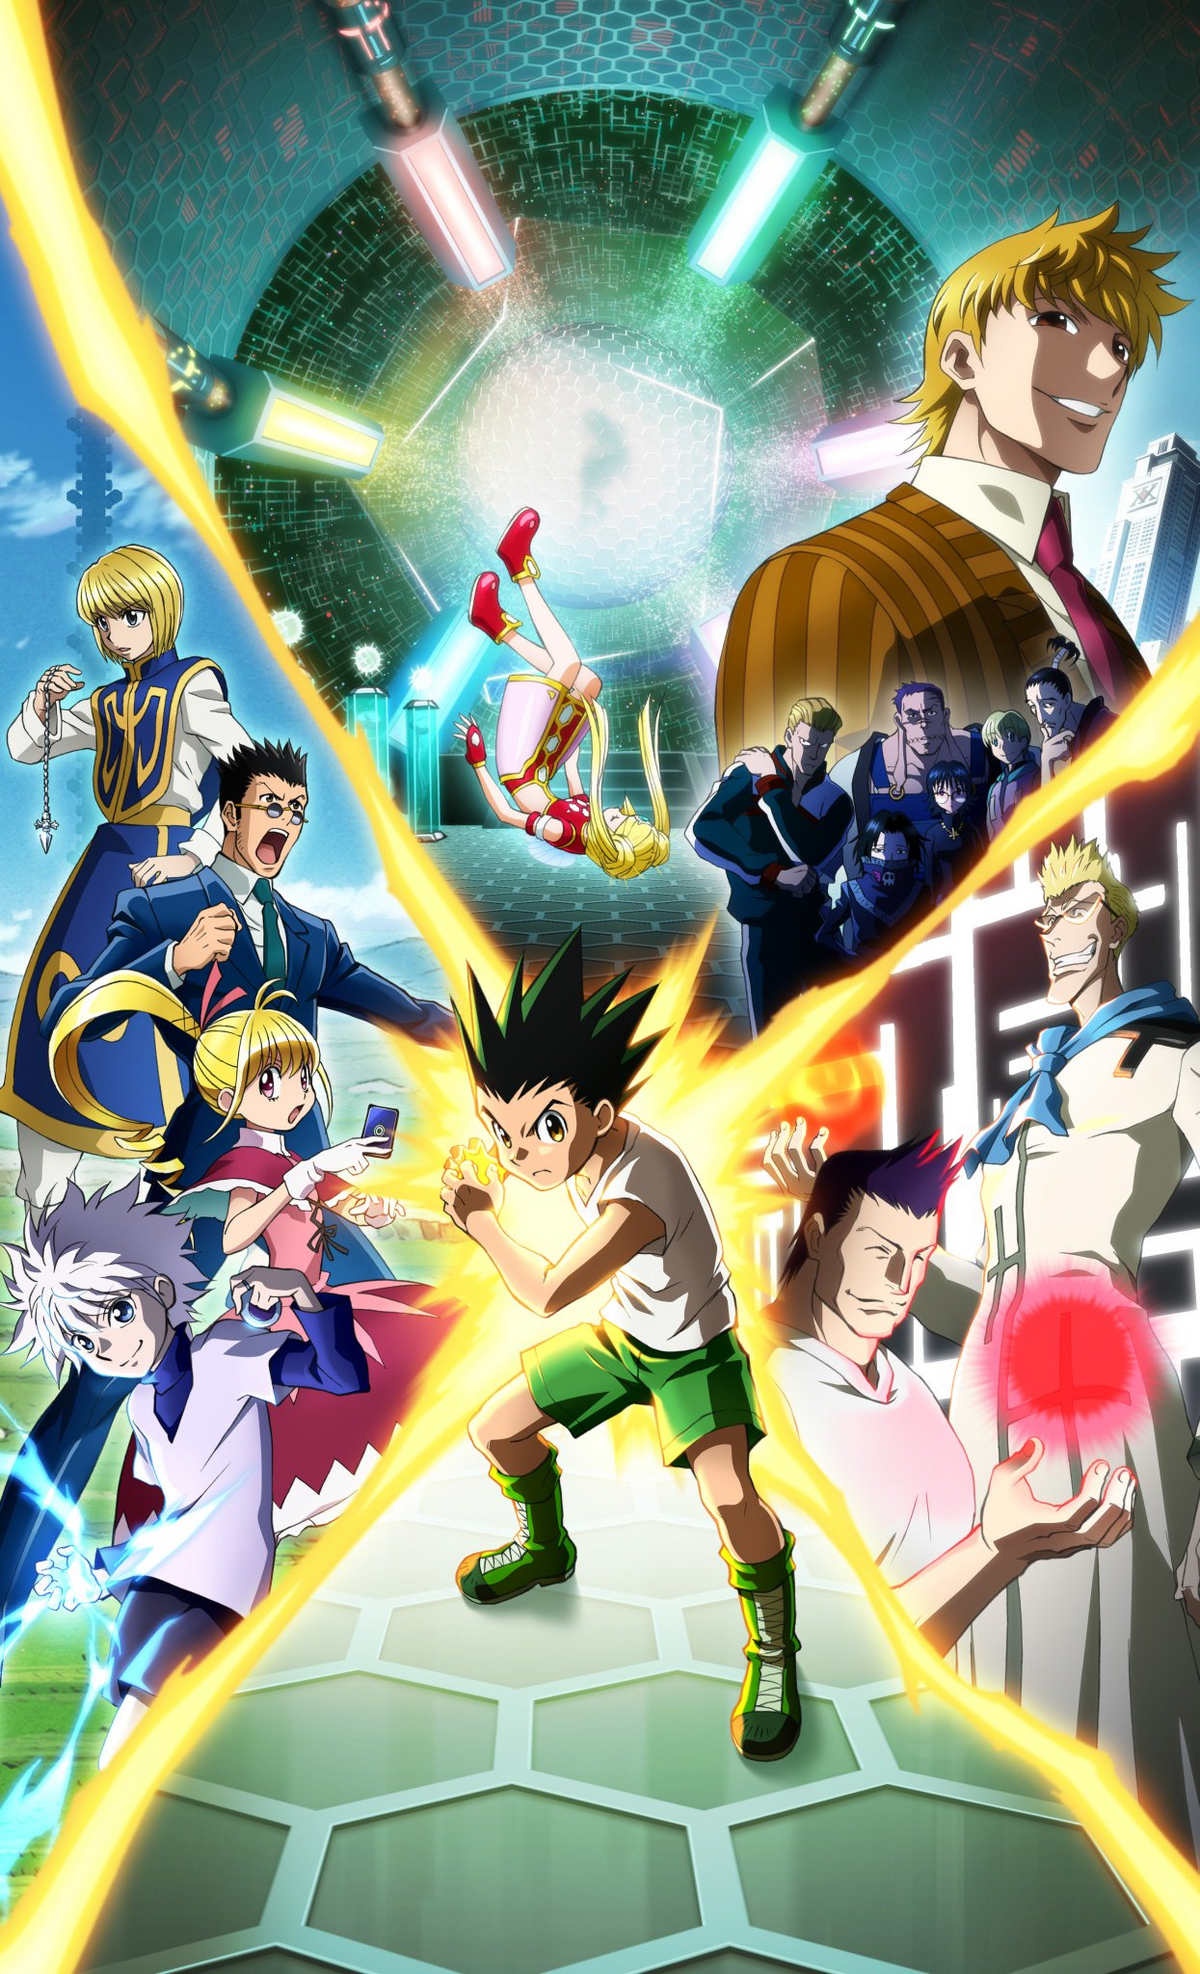 Hunter x Hunter Mobile Beginner Guide with Tips for the Adventure